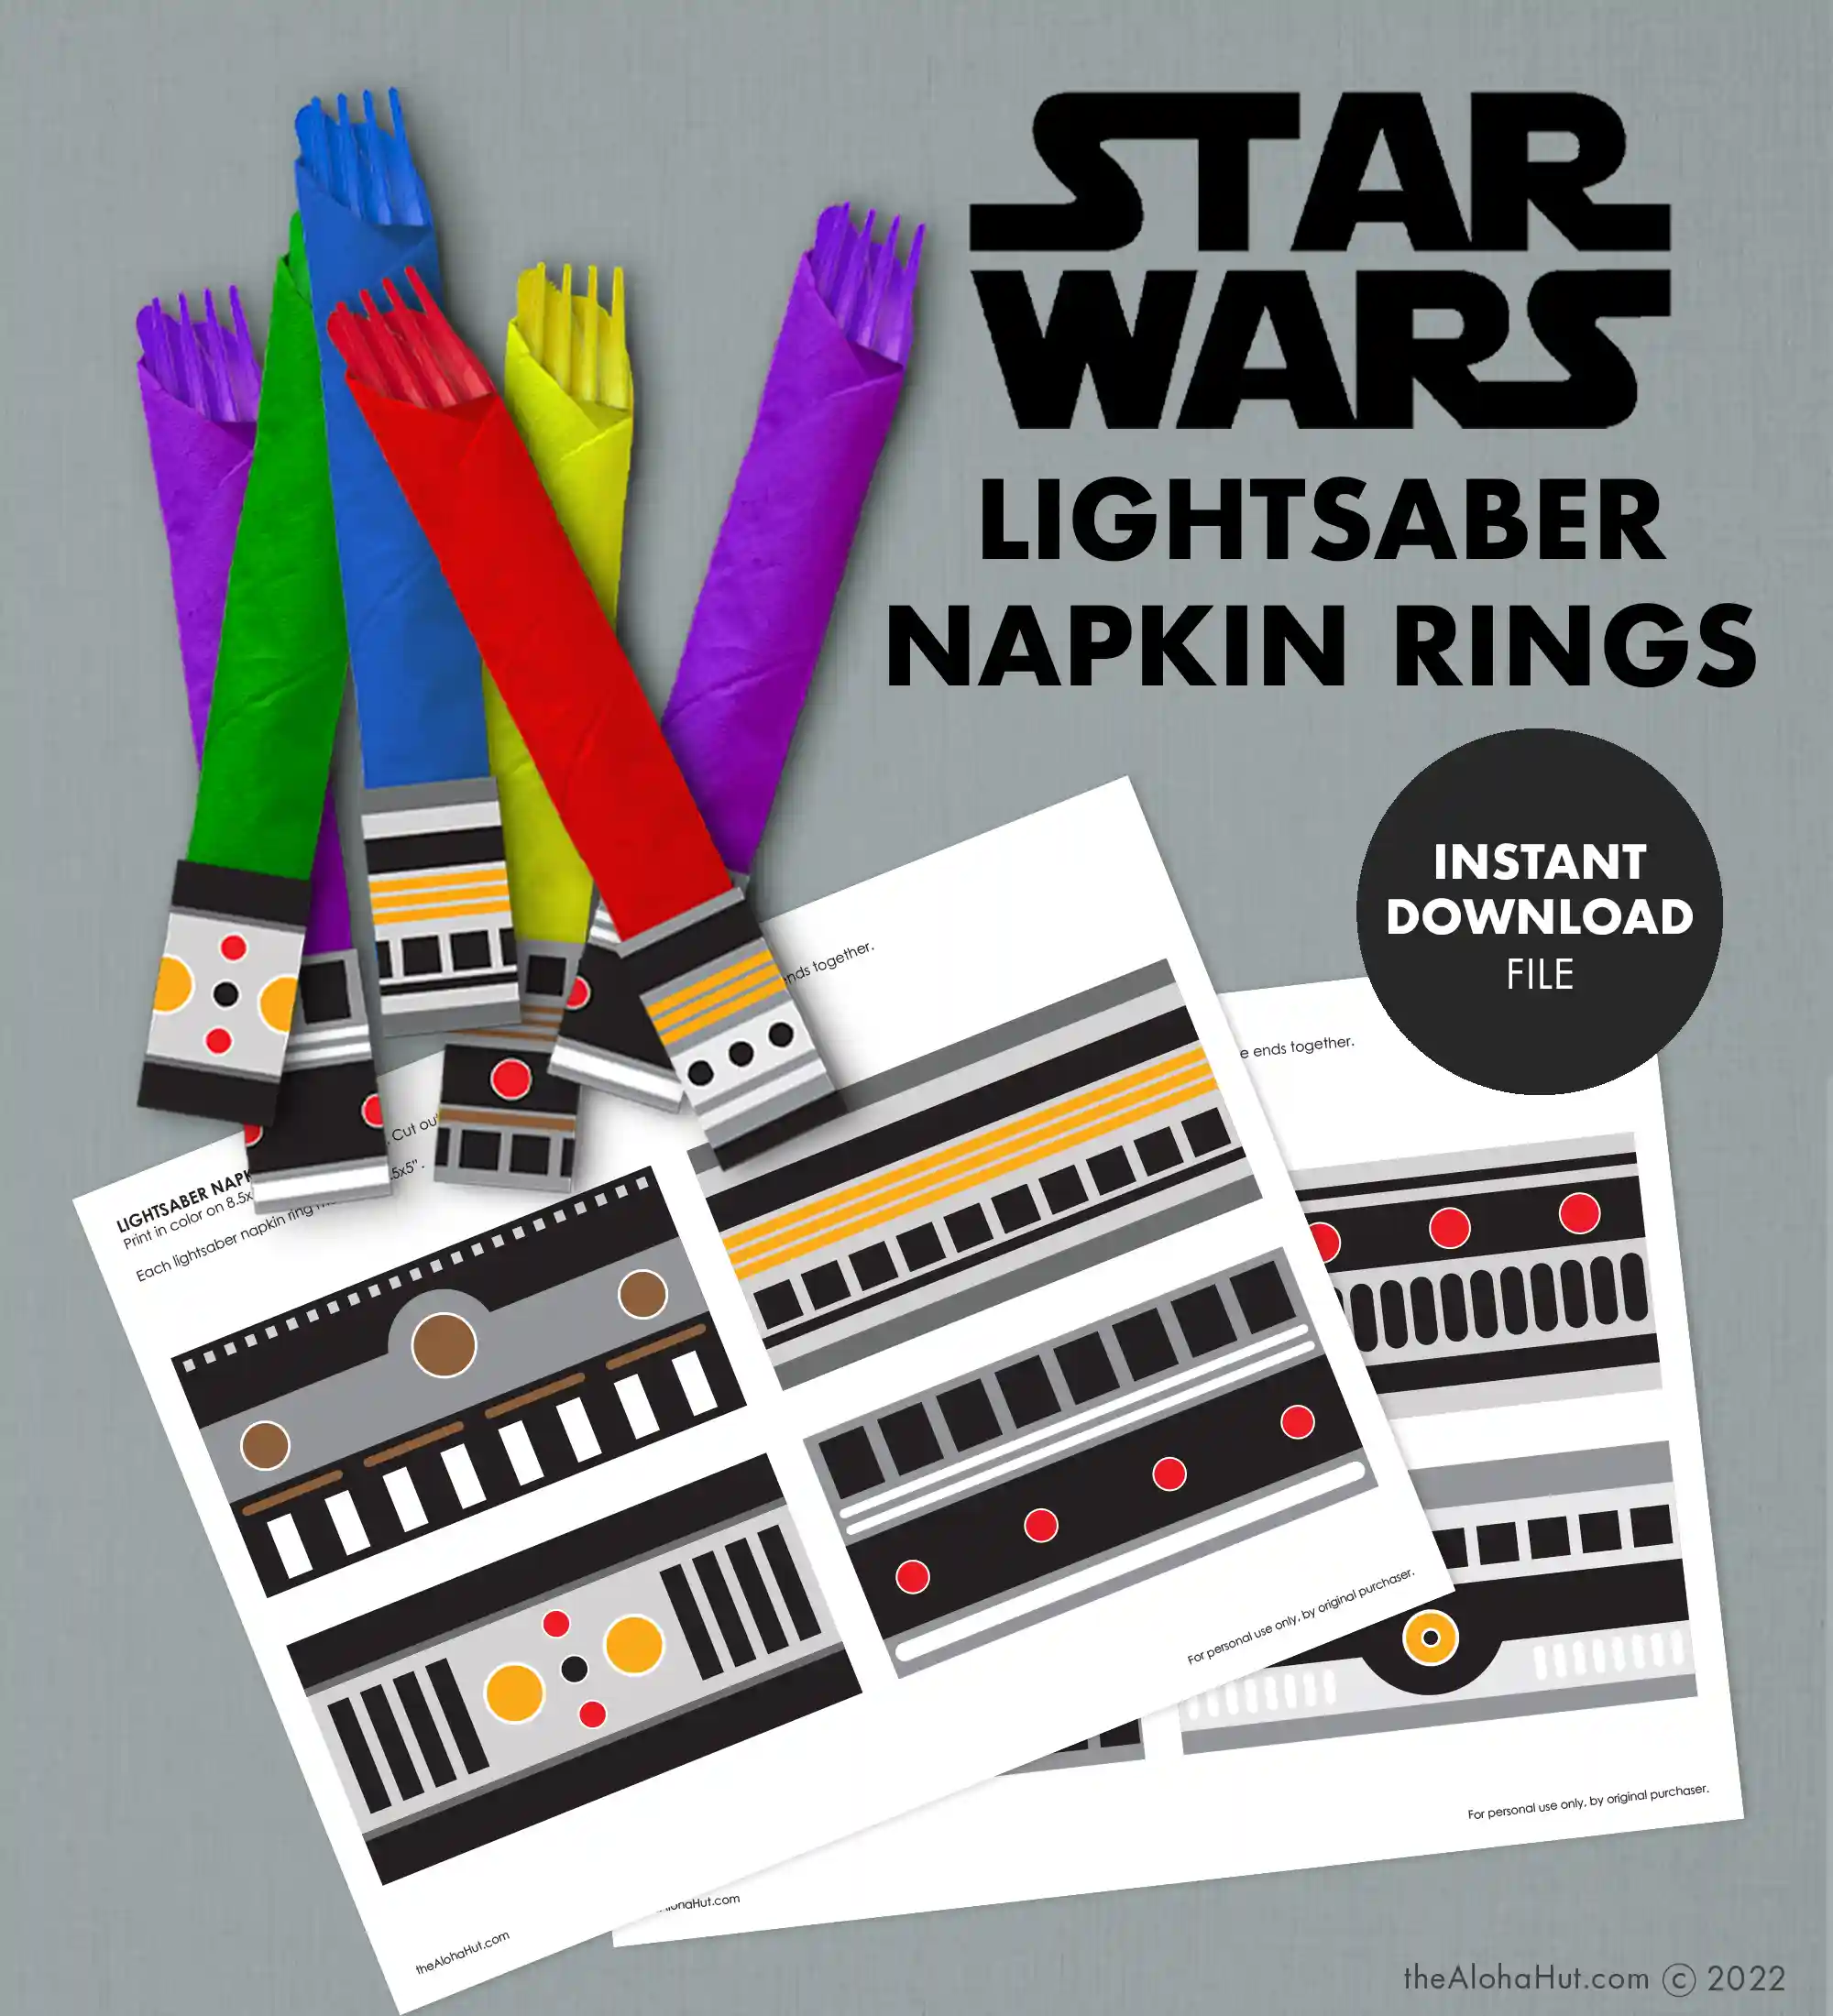 Star Wars party ideas, activities, birthday party games, decorations, and prints. Ideas and tips and tricks for throwing the best Star Wars themed kids birthday party, baby shower, or one with the force celebration. Includes Star Wars printable games, decorations (cupcake toppers, banners, gift tags, characters) and Star Wars party games (BINGO, scavenger hunt, pin the lightsaber on Yoda or Darth Vader). Napkin lightsaber rings.